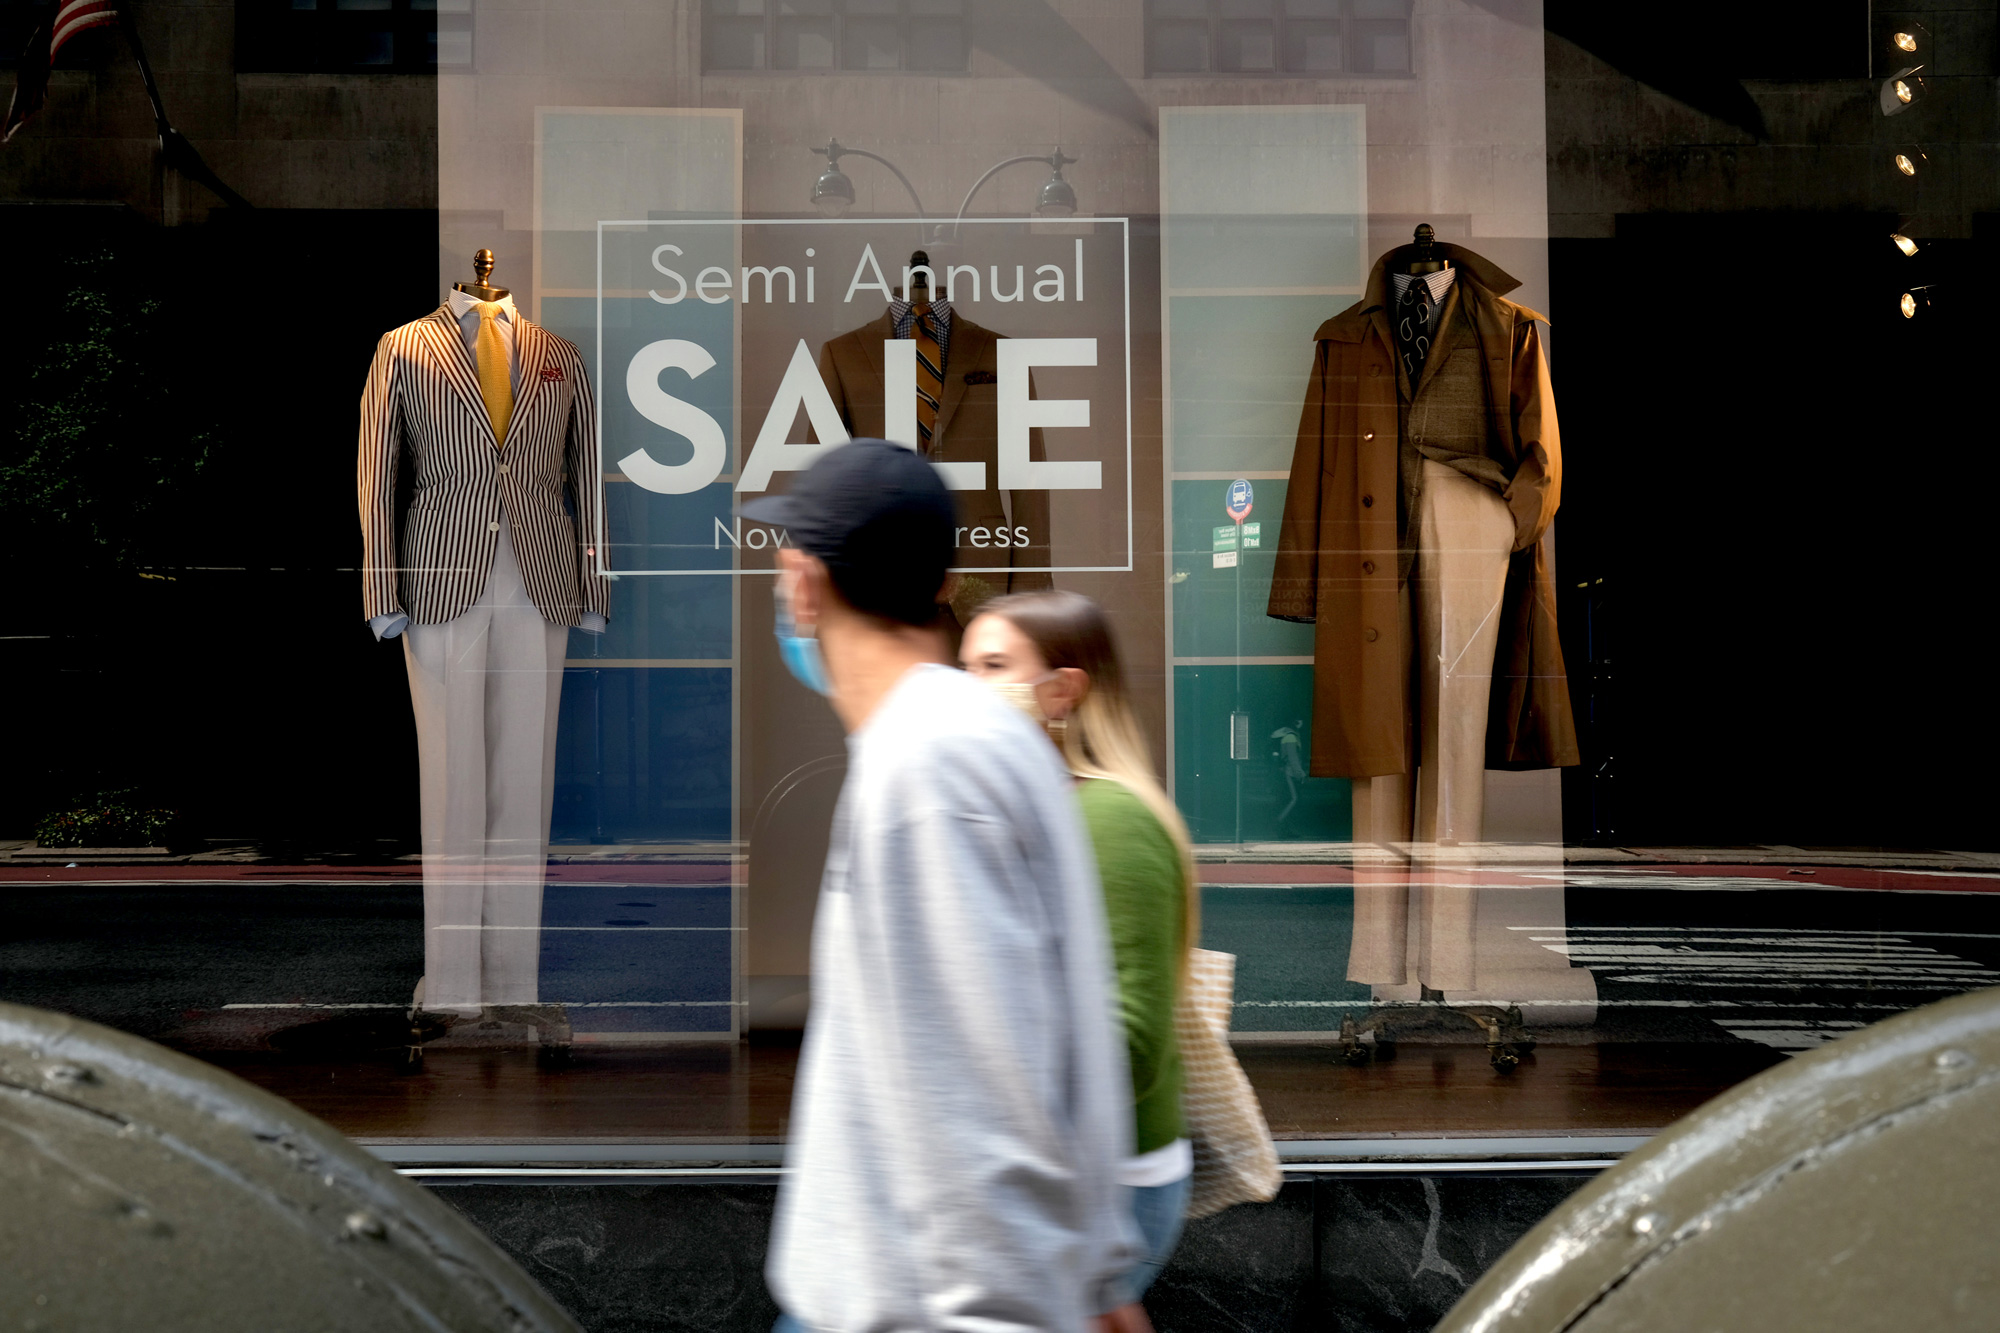 Men's business attire is displayed in the window of a Manhattan clothier on September 15 in New York City. 